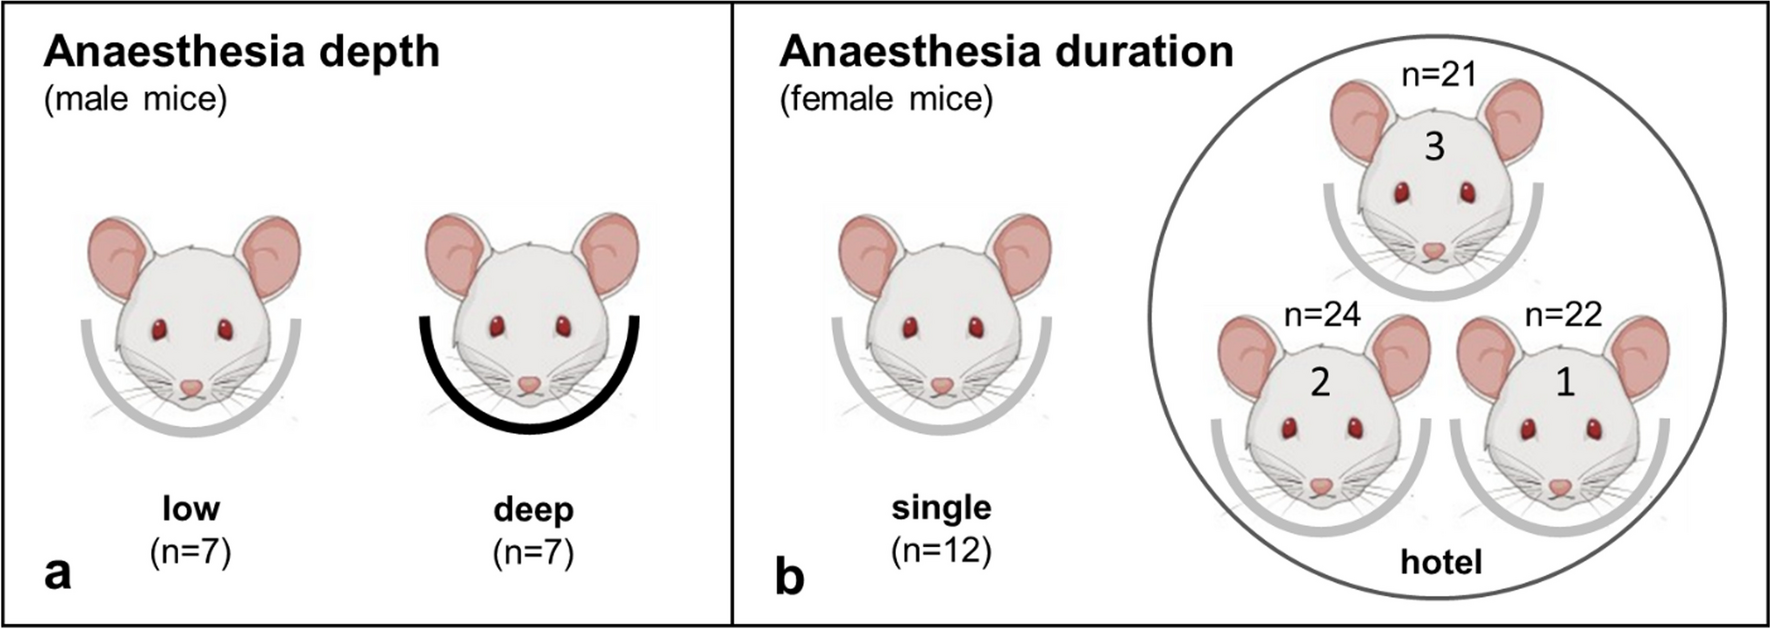 Effects of isoflurane anaesthesia depth and duration on renal function measured with [99mTc]Tc-mercaptoacetyltriglycine SPECT in mice